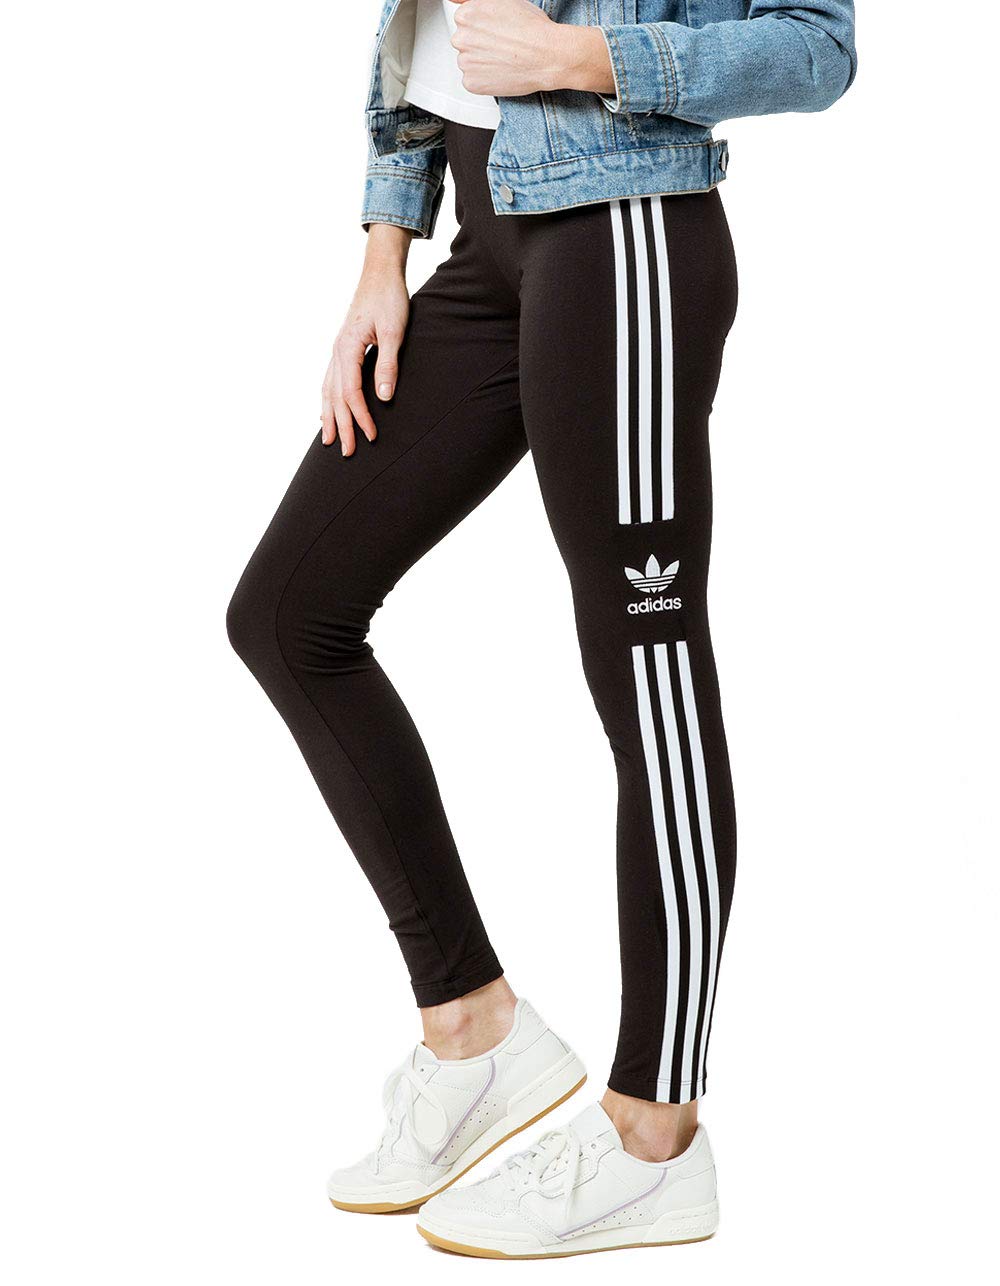 adidas Originals Women's Loungewear Trefoil Tights, List Price is $40, Now Only $15.93, You Save $24.07